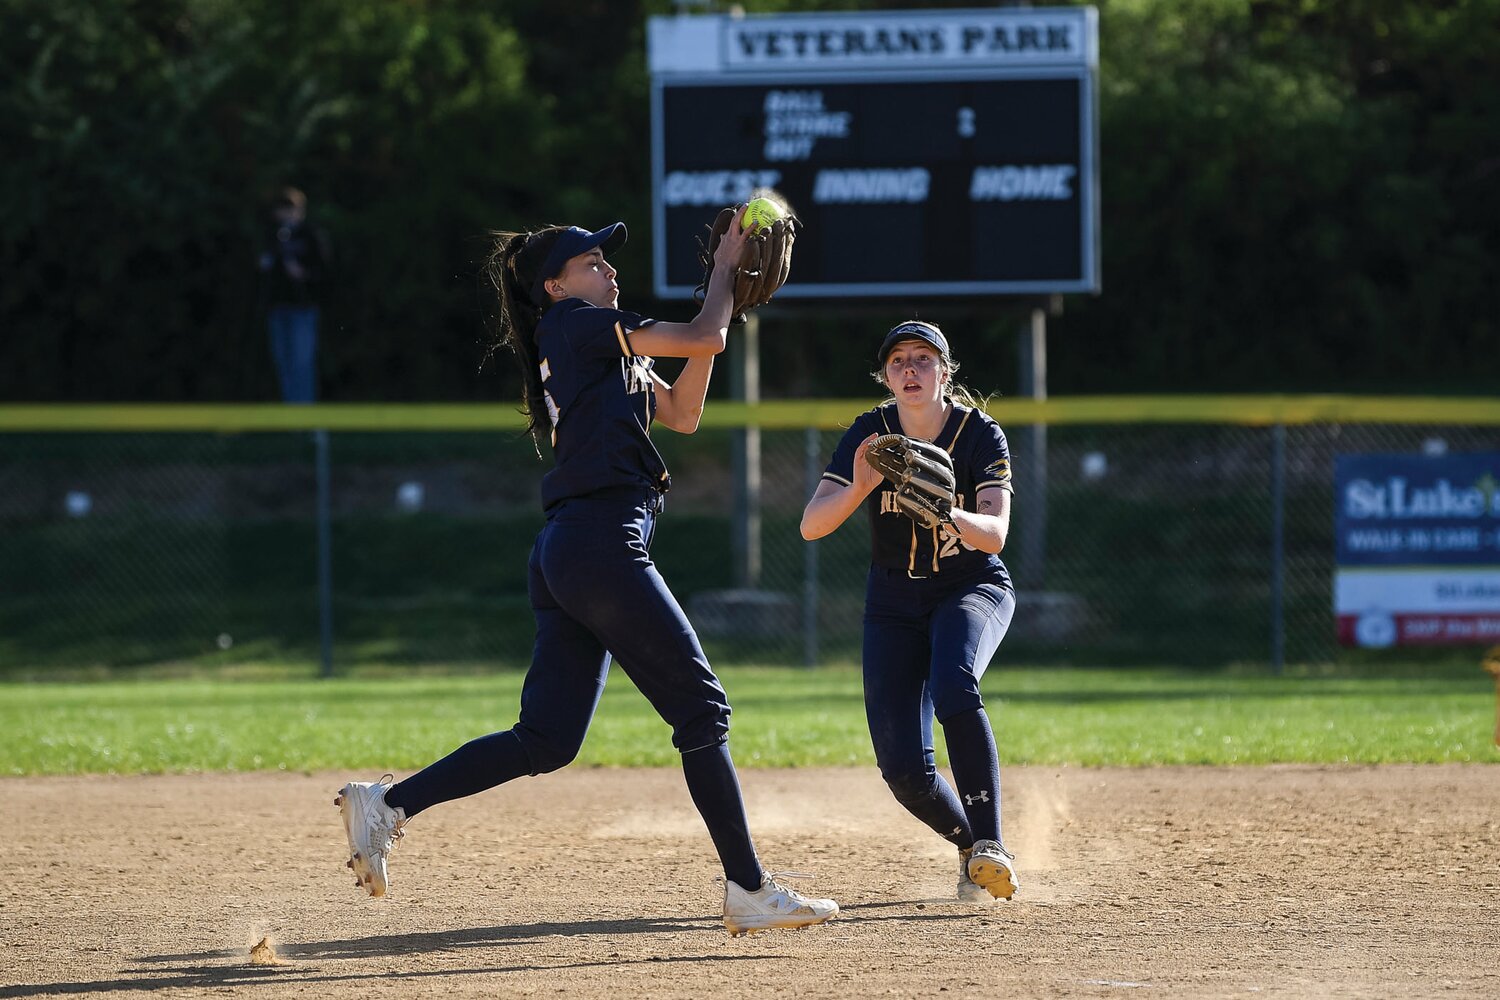 New Hope-Solebury third baseman Izzy Elizondo catches an infield pop up in the bottom of the sixth inning.